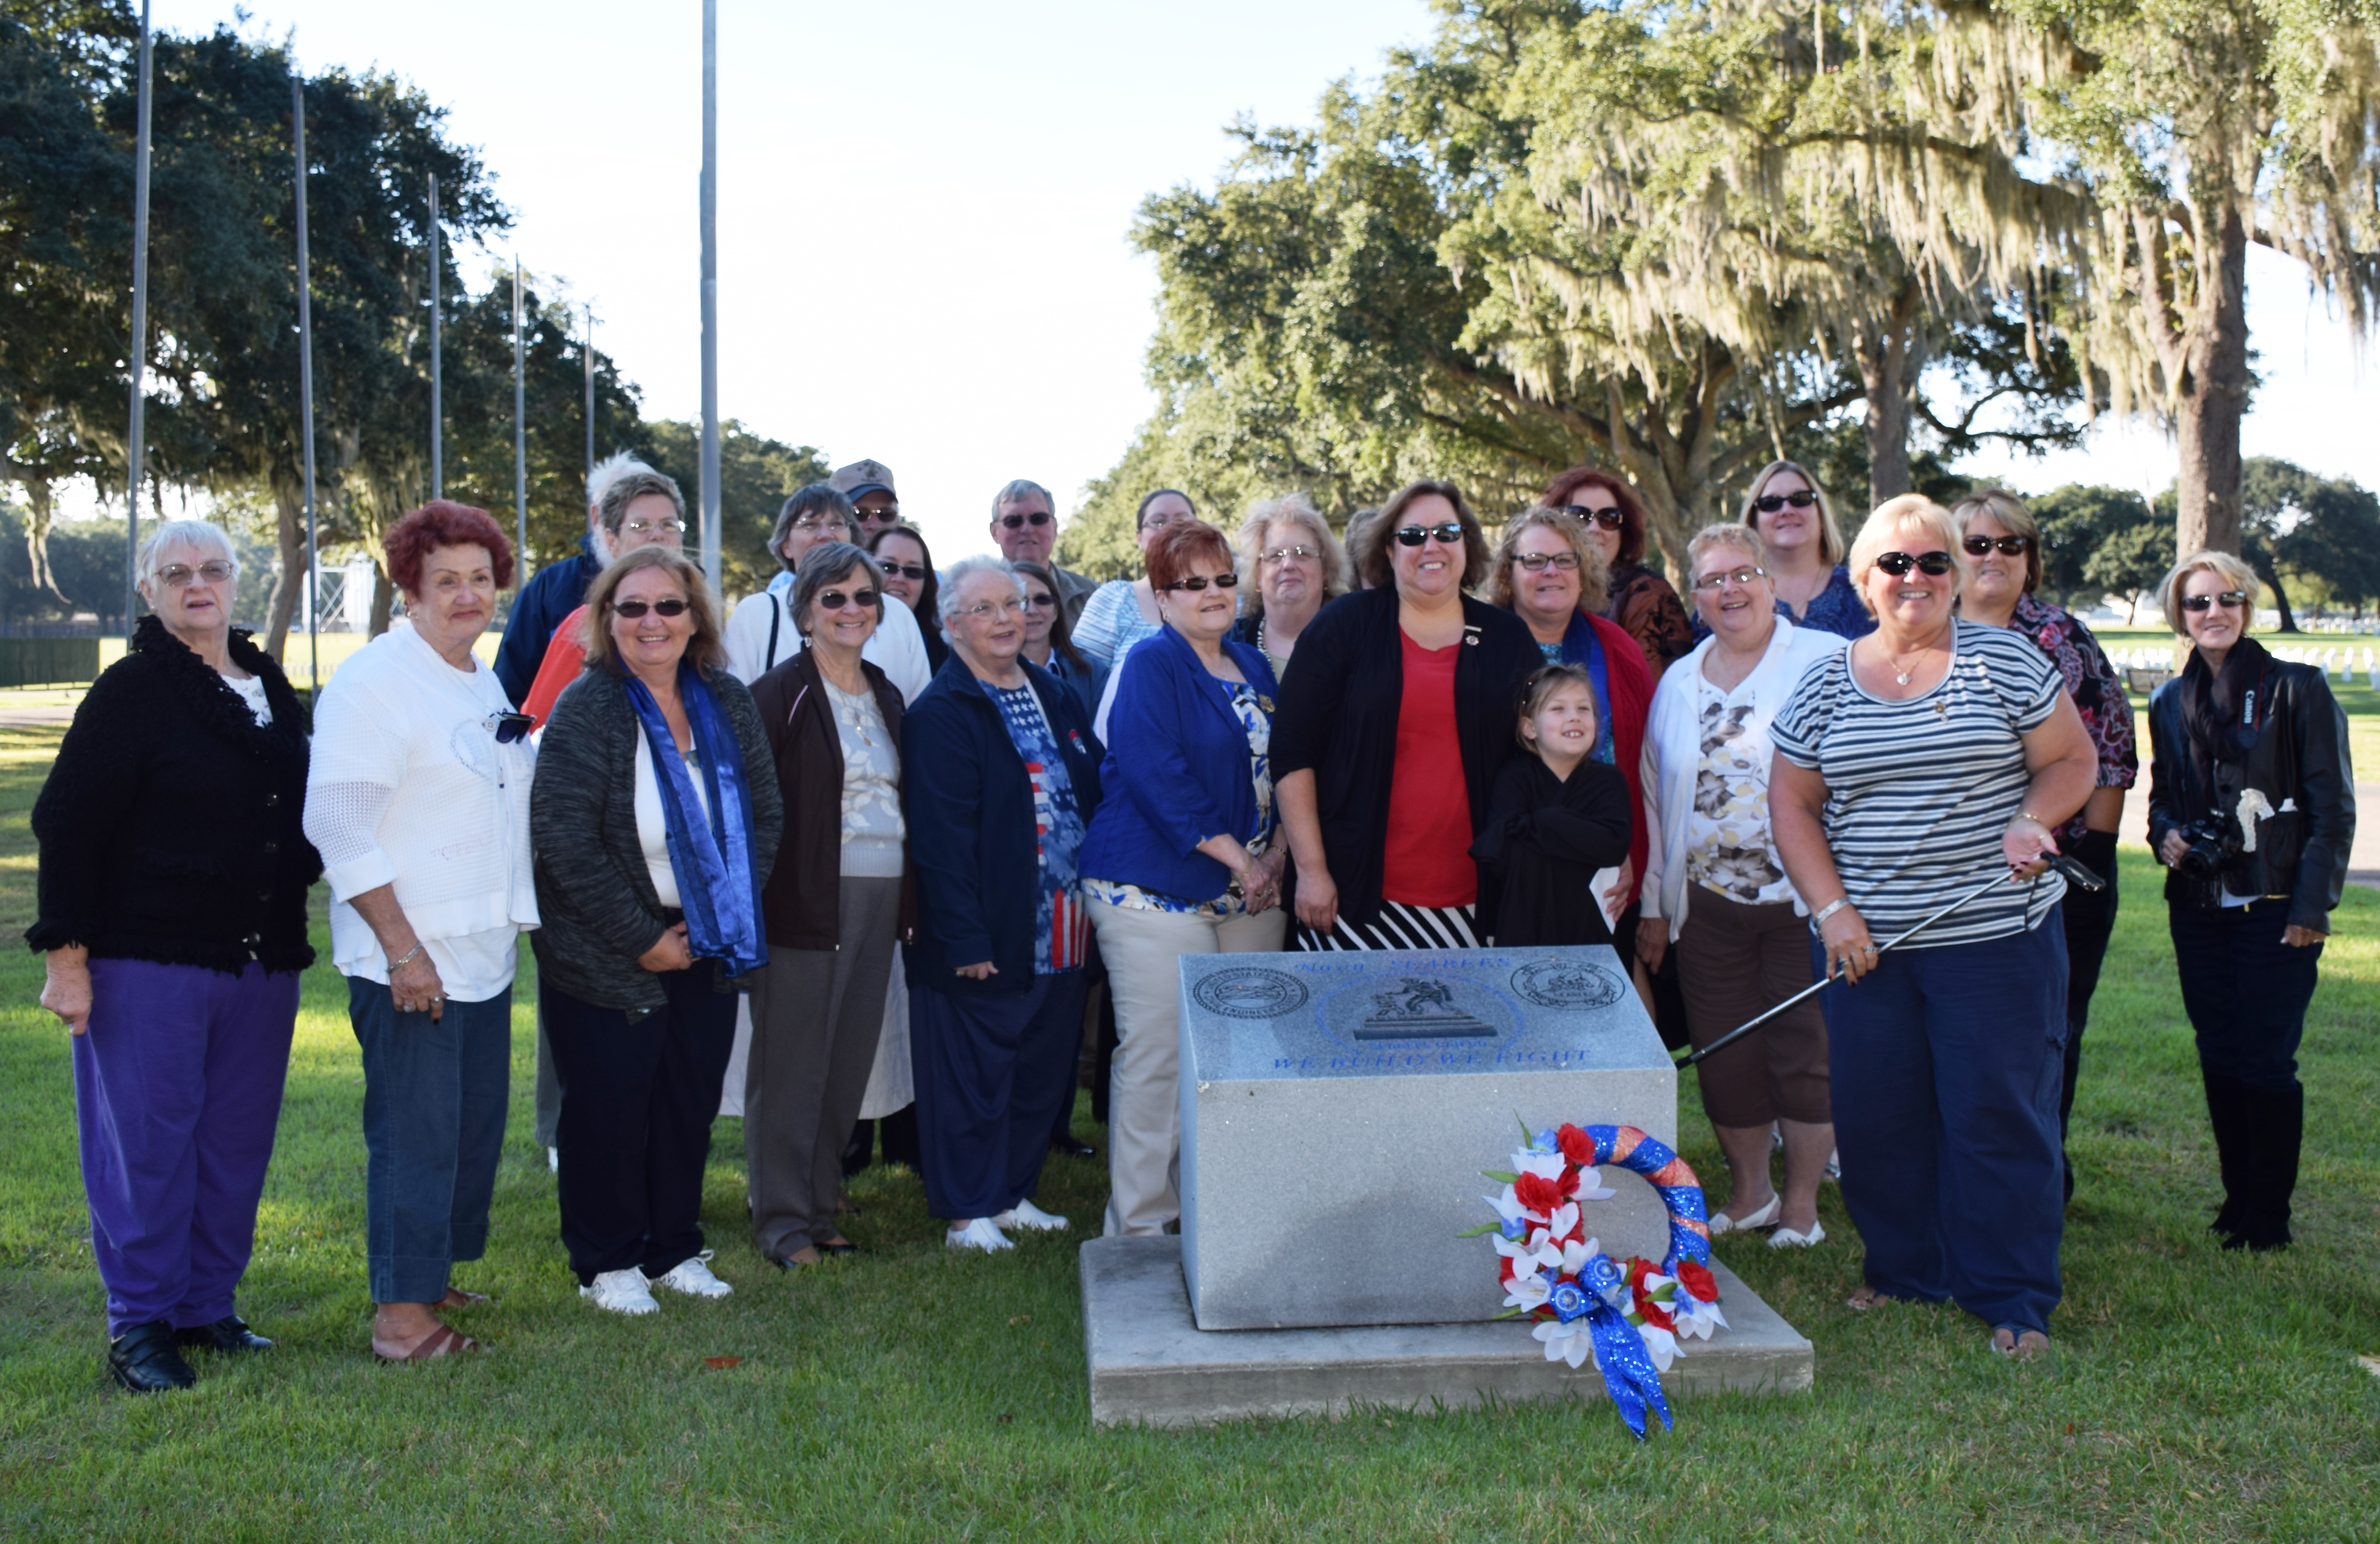 2015 National Convention attendees @ the Seabees Memorial